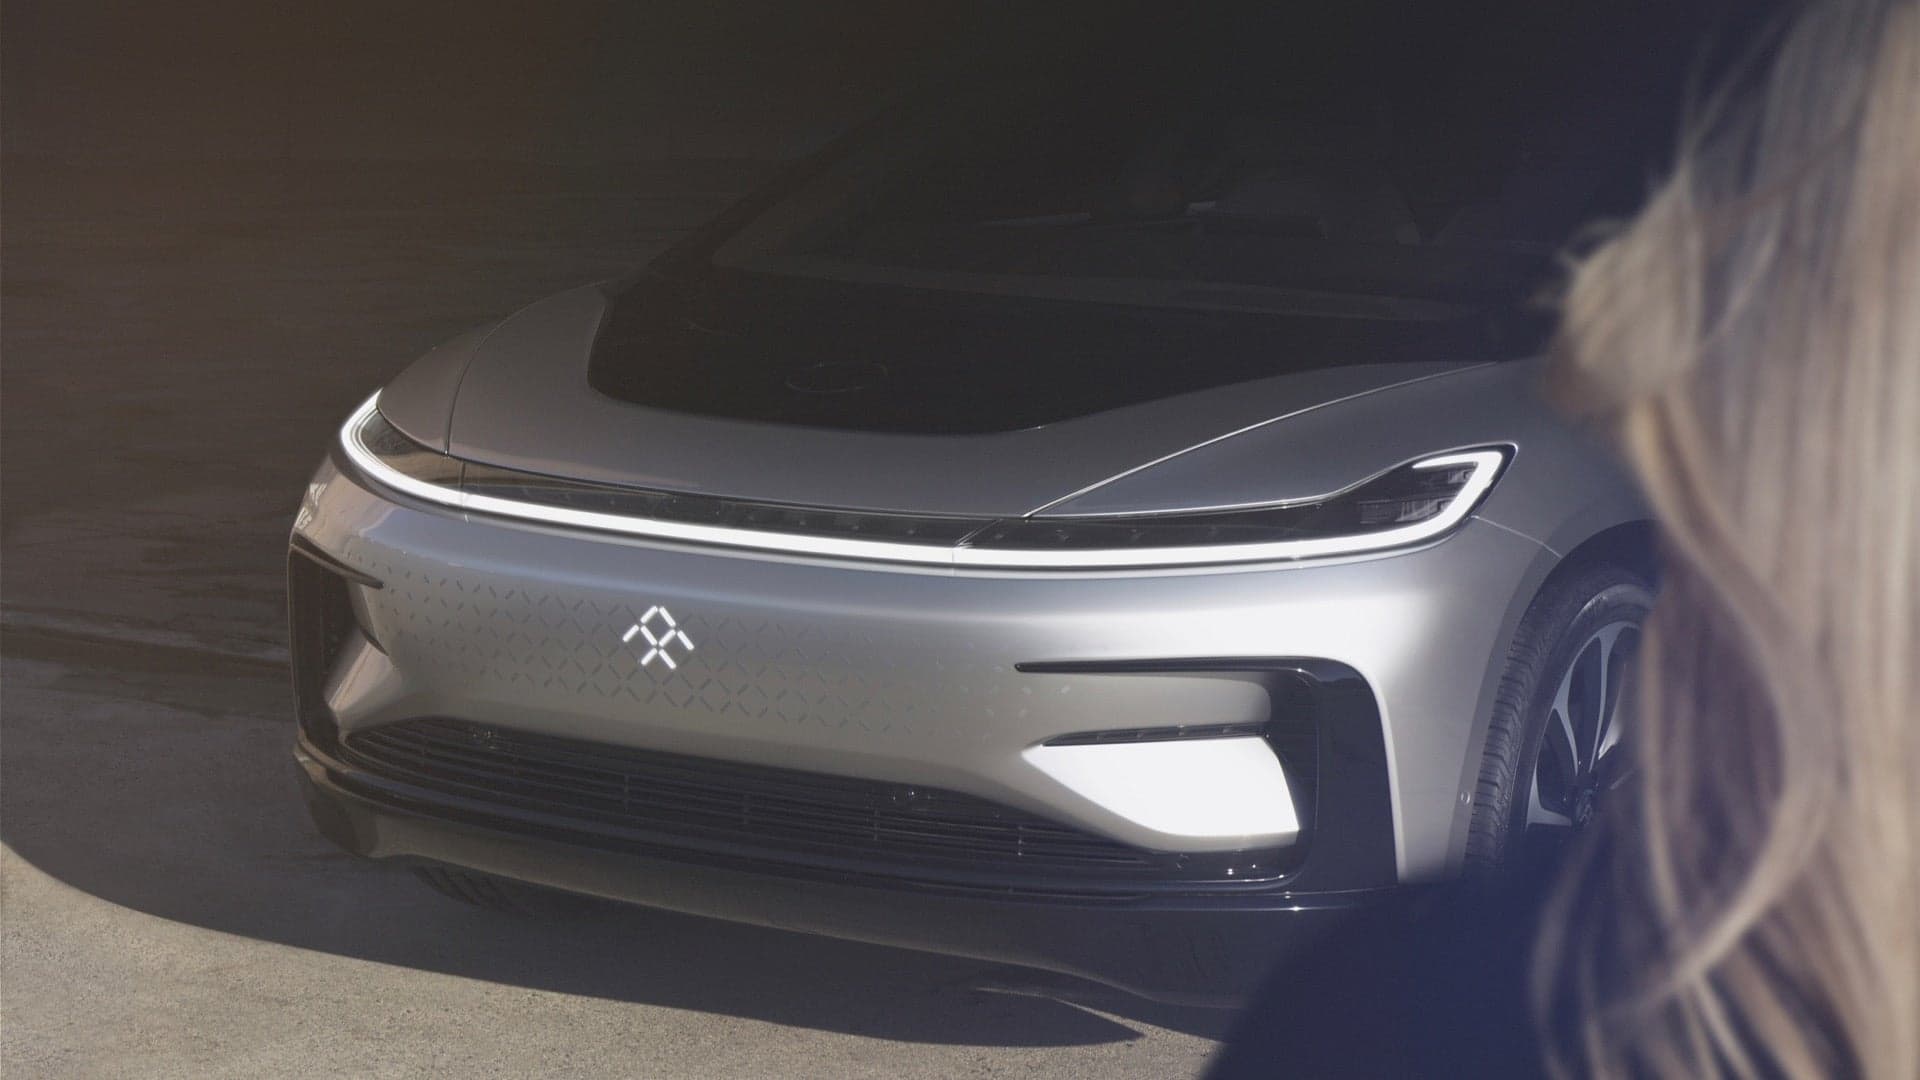 Furloughed Faraday Future Workers Still on Hold Despite New Investments: Report